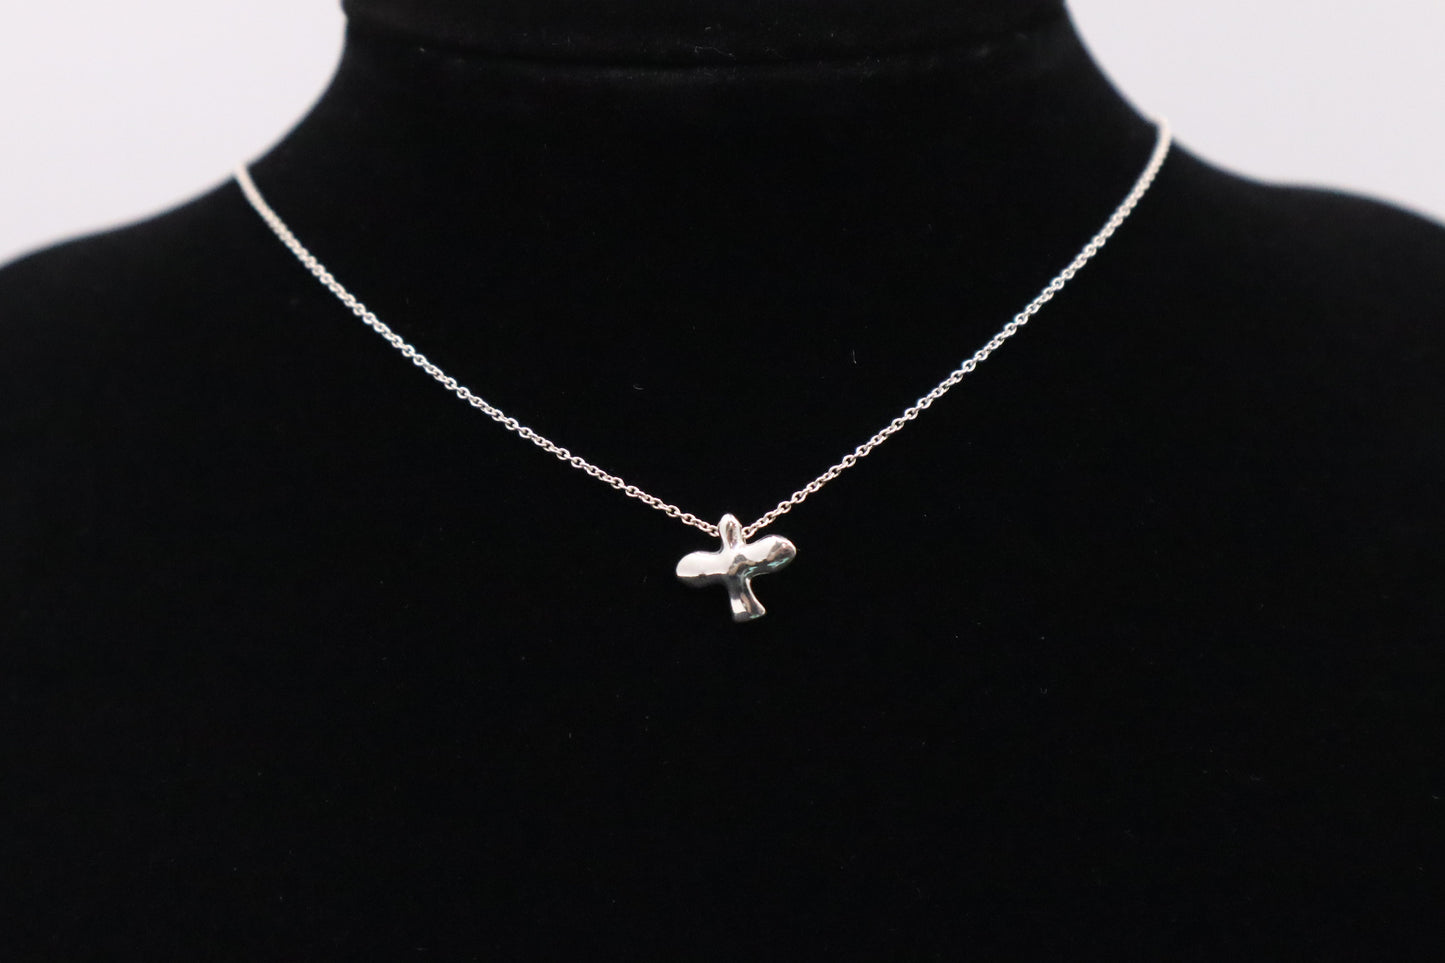 Tiffany & Co. Bird Necklace in Sterling Silver